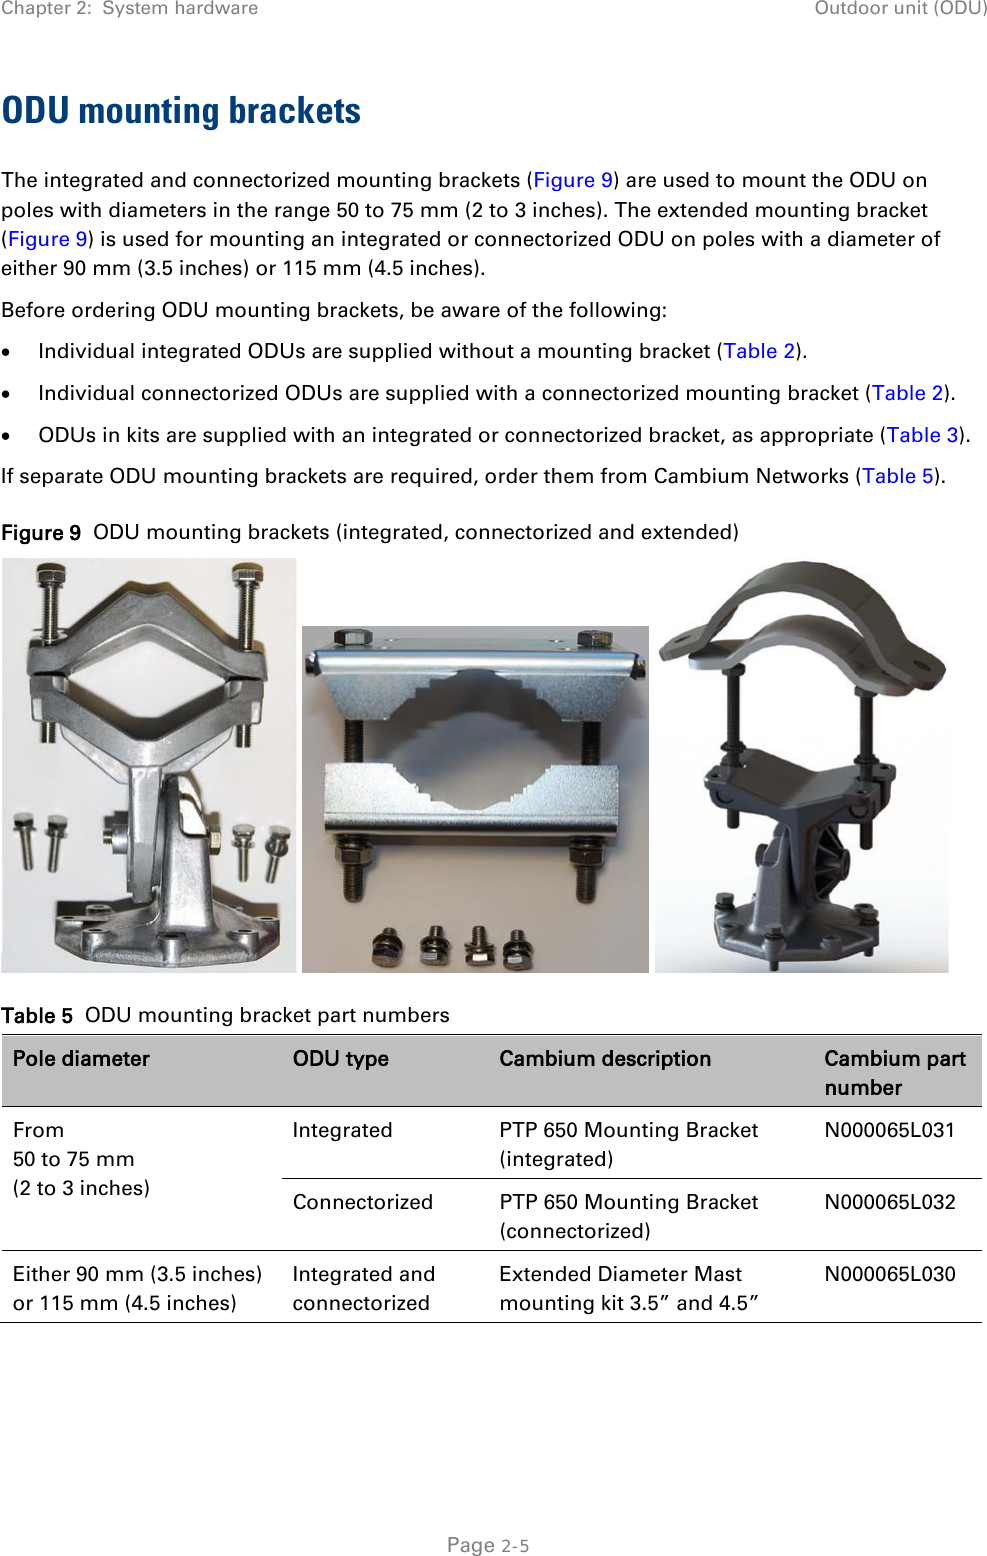 Chapter 2:  System hardware Outdoor unit (ODU)  ODU mounting brackets The integrated and connectorized mounting brackets (Figure 9) are used to mount the ODU on poles with diameters in the range 50 to 75 mm (2 to 3 inches). The extended mounting bracket (Figure 9) is used for mounting an integrated or connectorized ODU on poles with a diameter of either 90 mm (3.5 inches) or 115 mm (4.5 inches). Before ordering ODU mounting brackets, be aware of the following: • Individual integrated ODUs are supplied without a mounting bracket (Table 2). • Individual connectorized ODUs are supplied with a connectorized mounting bracket (Table 2). • ODUs in kits are supplied with an integrated or connectorized bracket, as appropriate (Table 3). If separate ODU mounting brackets are required, order them from Cambium Networks (Table 5). Figure 9  ODU mounting brackets (integrated, connectorized and extended)      Table 5  ODU mounting bracket part numbers Pole diameter ODU type Cambium description Cambium part number From  50 to 75 mm  (2 to 3 inches) Integrated PTP 650 Mounting Bracket (integrated) N000065L031 Connectorized PTP 650 Mounting Bracket (connectorized) N000065L032 Either 90 mm (3.5 inches) or 115 mm (4.5 inches) Integrated and connectorized Extended Diameter Mast mounting kit 3.5” and 4.5” N000065L030   Page 2-5 